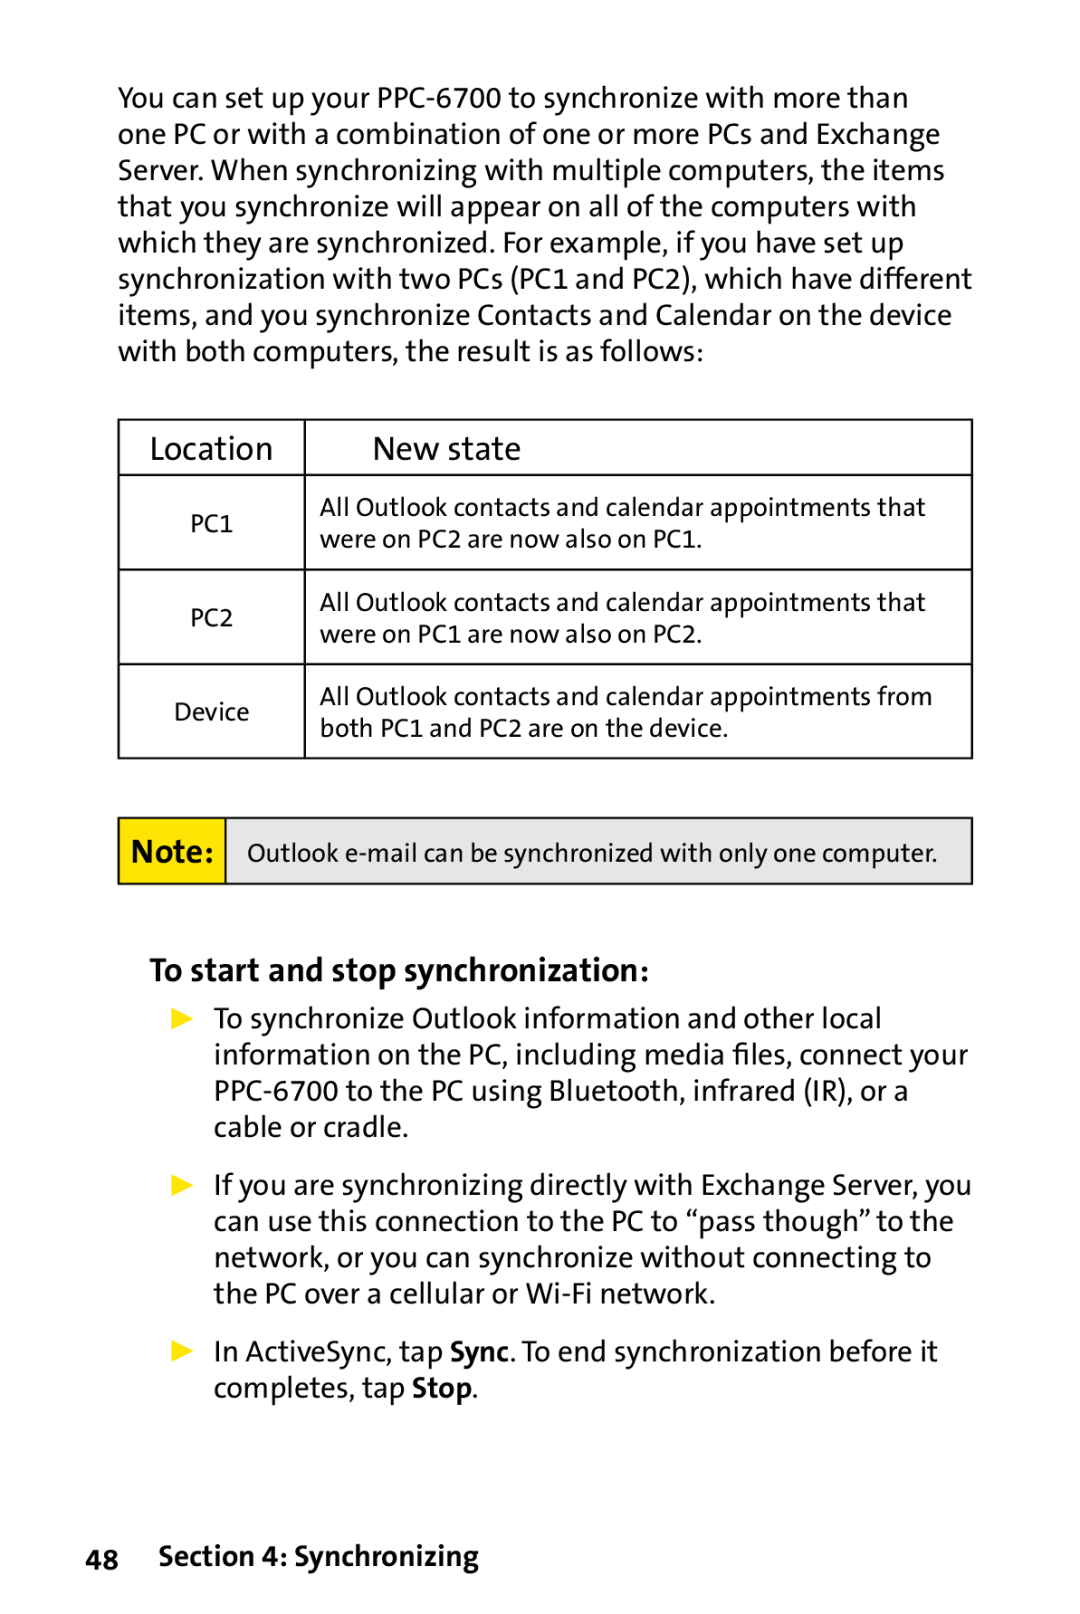 Sprint Nextel PPC-6700 manual Location, New state, To start and stop synchronization, Synchronizing 